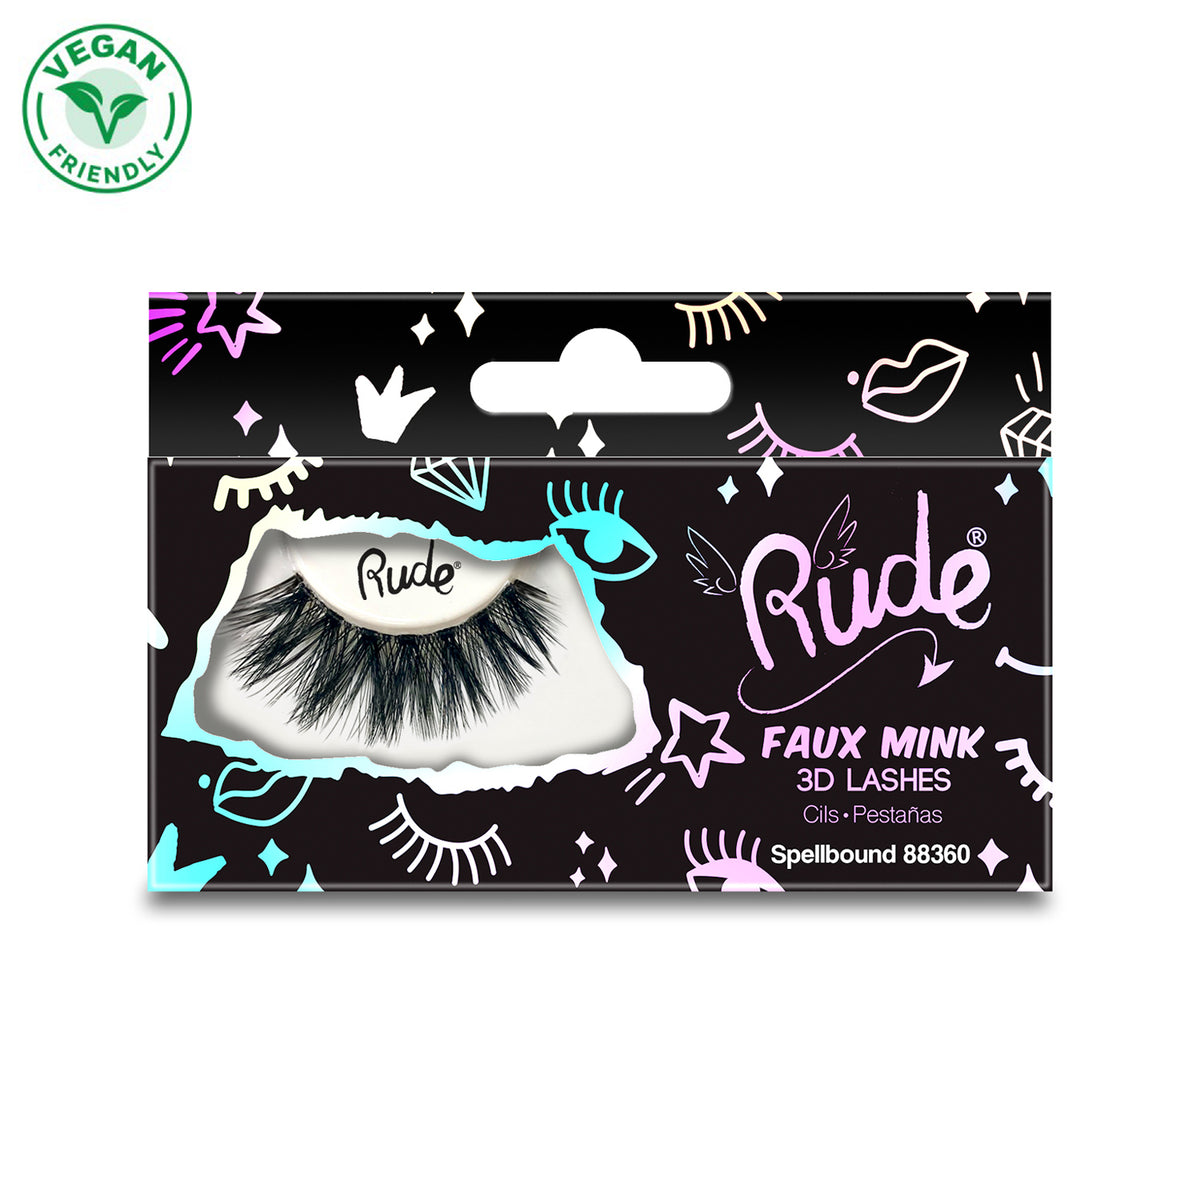 Essential Faux Mink 3D Lashes | Everyday Faux Mink Lashes Spellbound